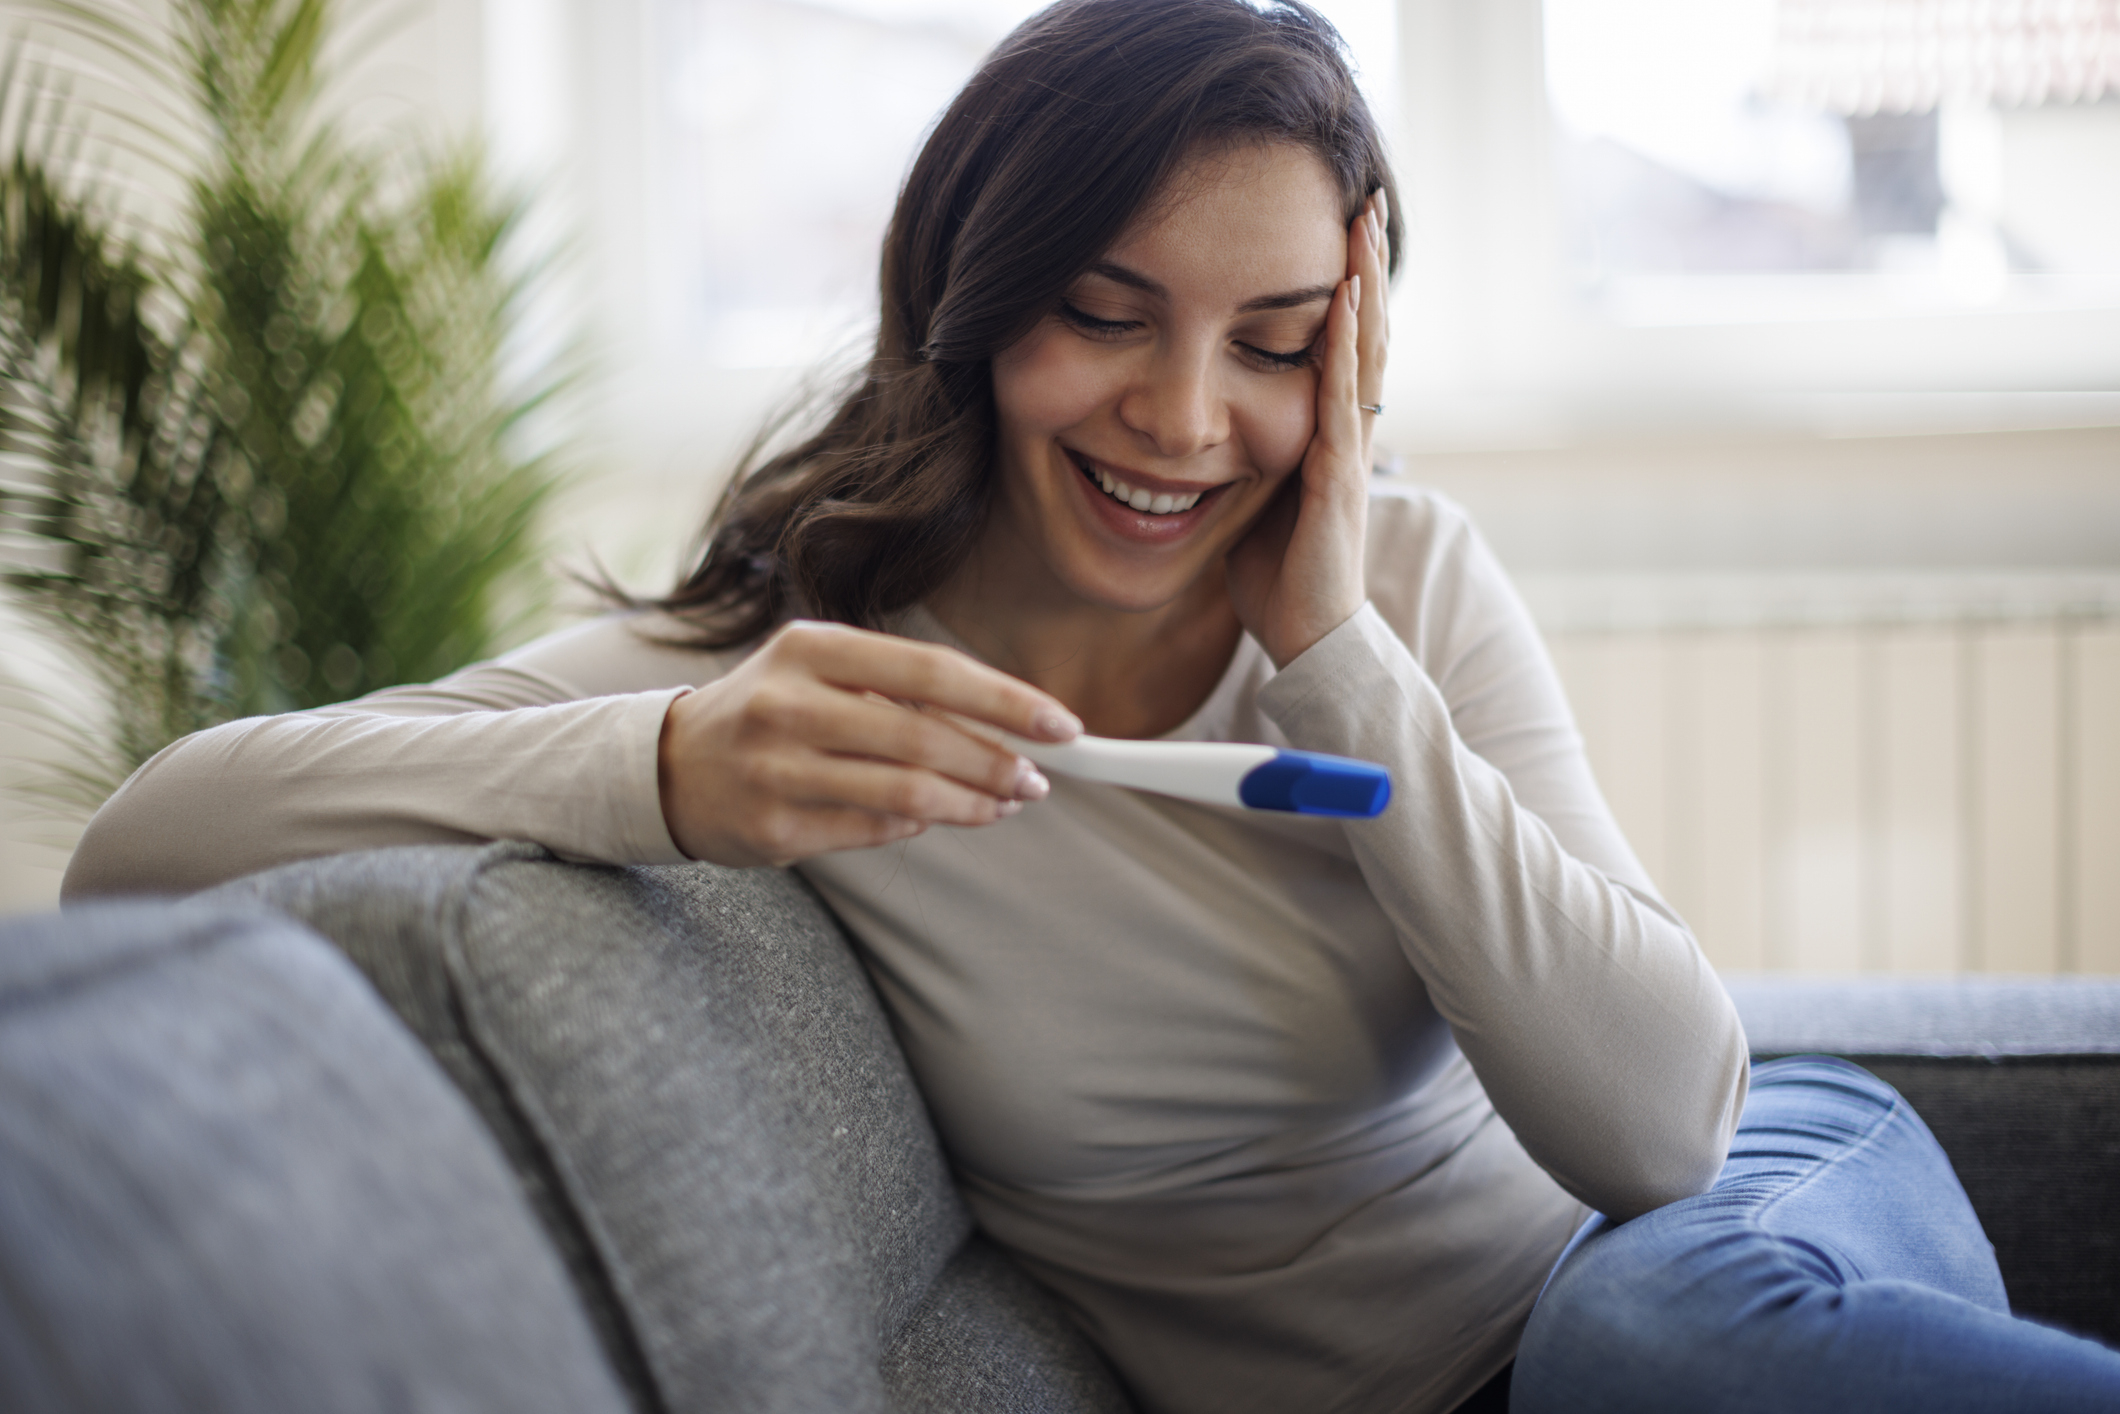 Woman smiling at a positive pregnancy test while sitting on a couch